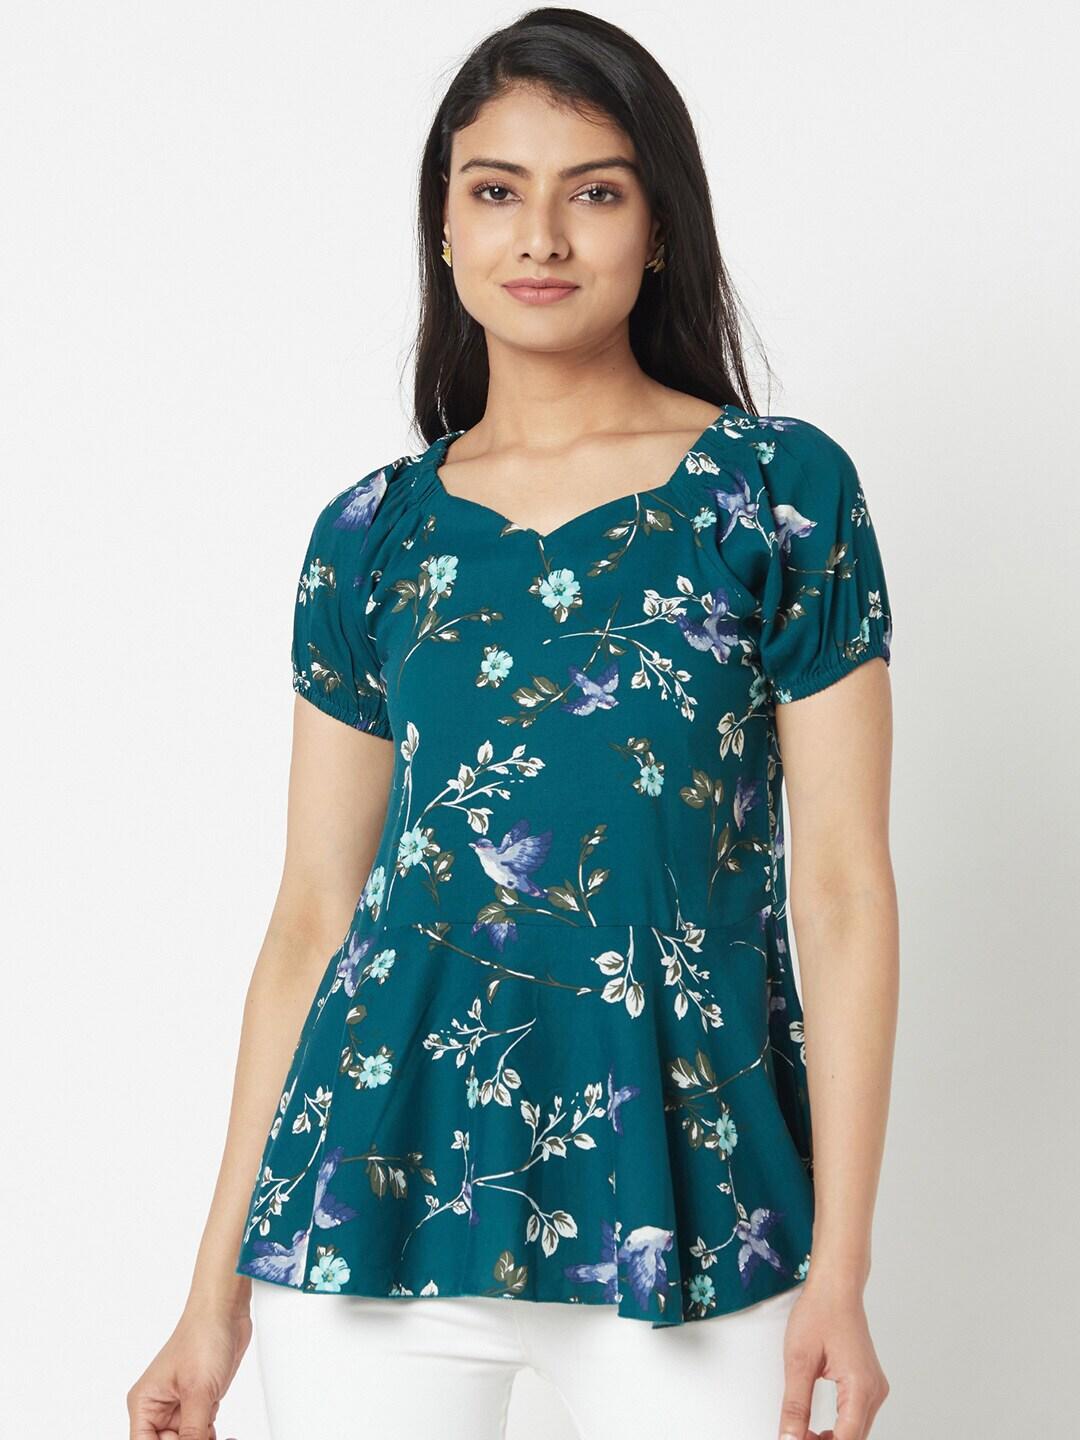 Miss Grace Sweetheart Neck Floral Printed Top